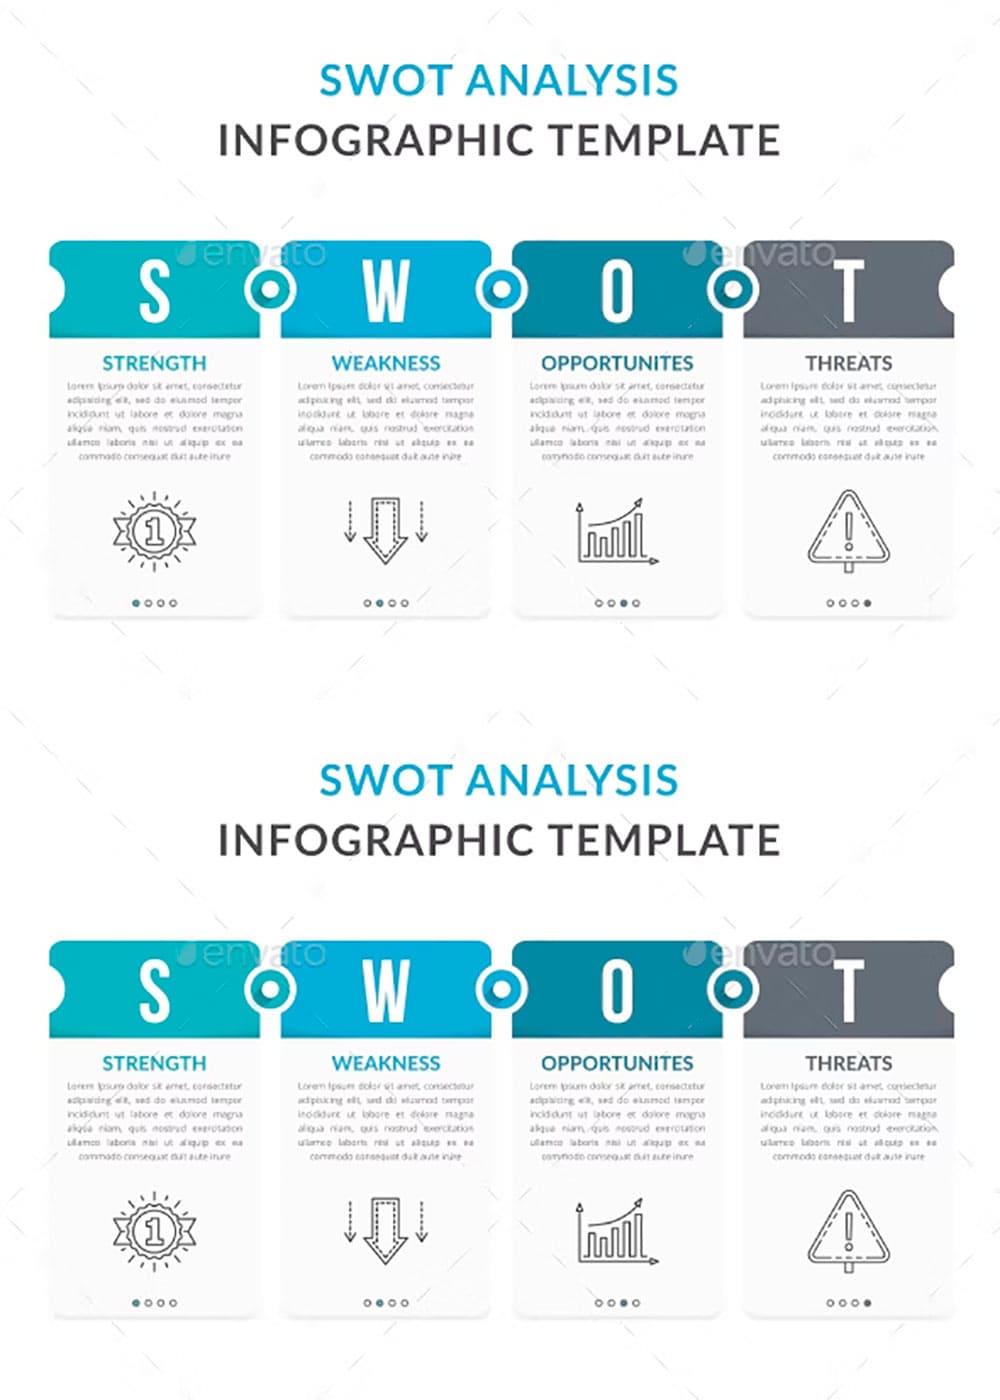 SWOT analysis diagram, picture for pinterest.